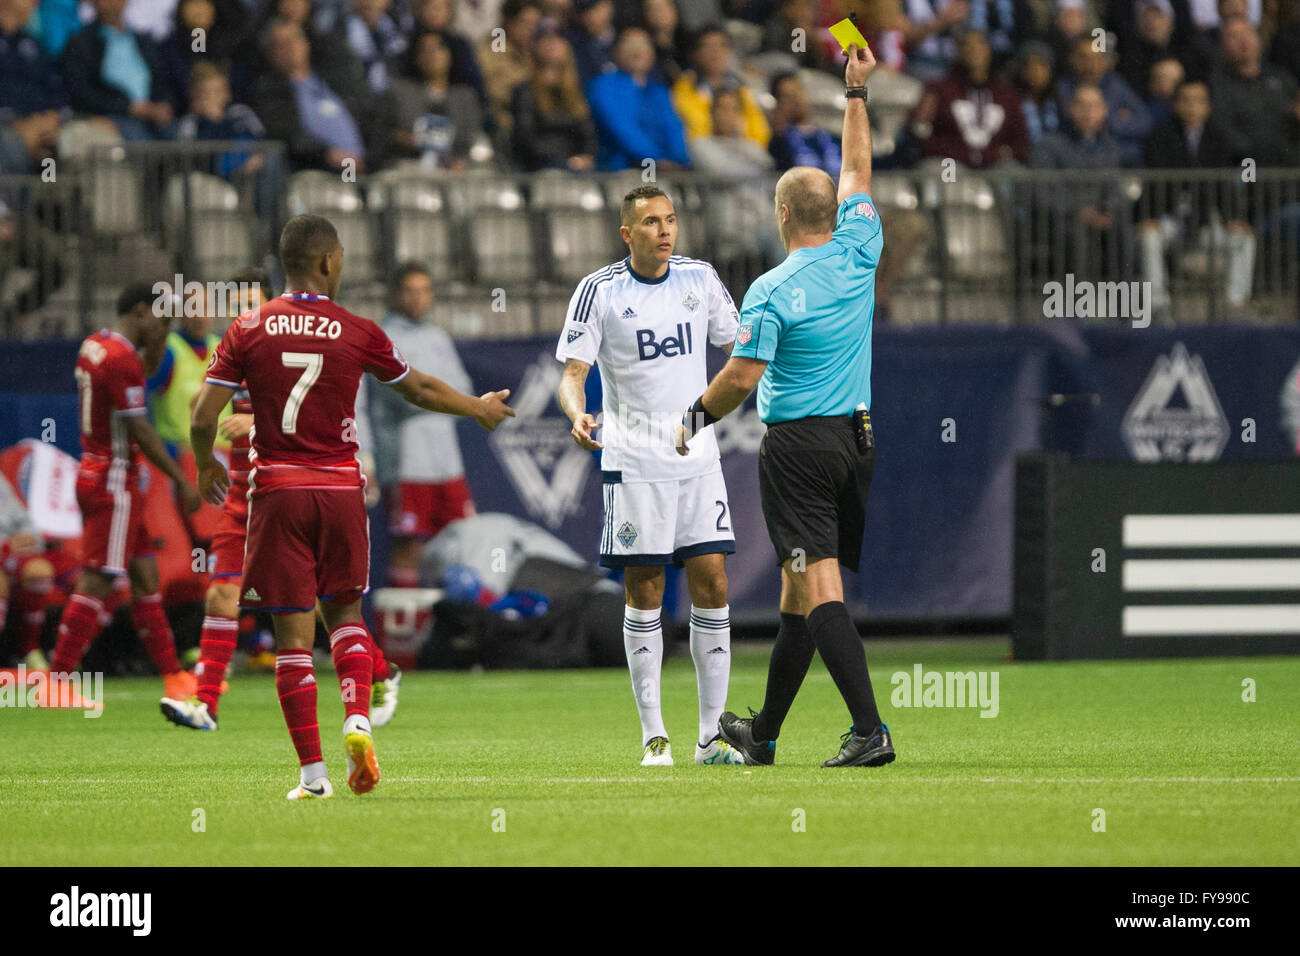 Vancouver, Canada. 23, April, 2016. MLS Soccer - Forward, Blas Perez is given a yellow card. Vancouver(white) vs Dallas(red), Vancouver wins 3-0. BC Place Stadium.  Credit:  Gerry Rousseau/Alamy Live News Stock Photo